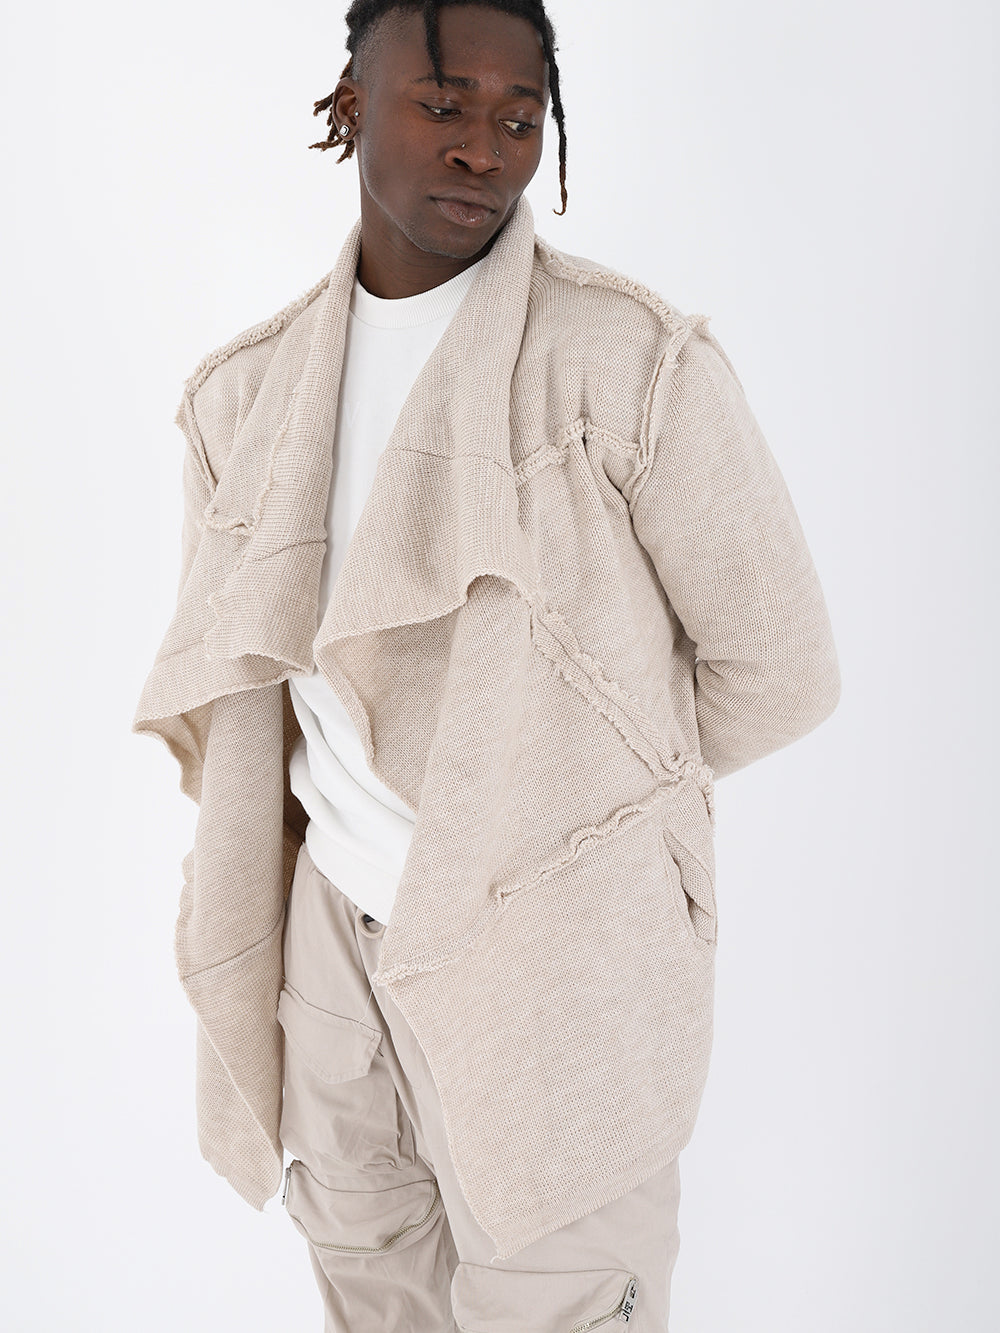 A man wearing an ASYMMETRIC SHORT CARDIGAN // IVORY jacket and pants with a true to size fit.